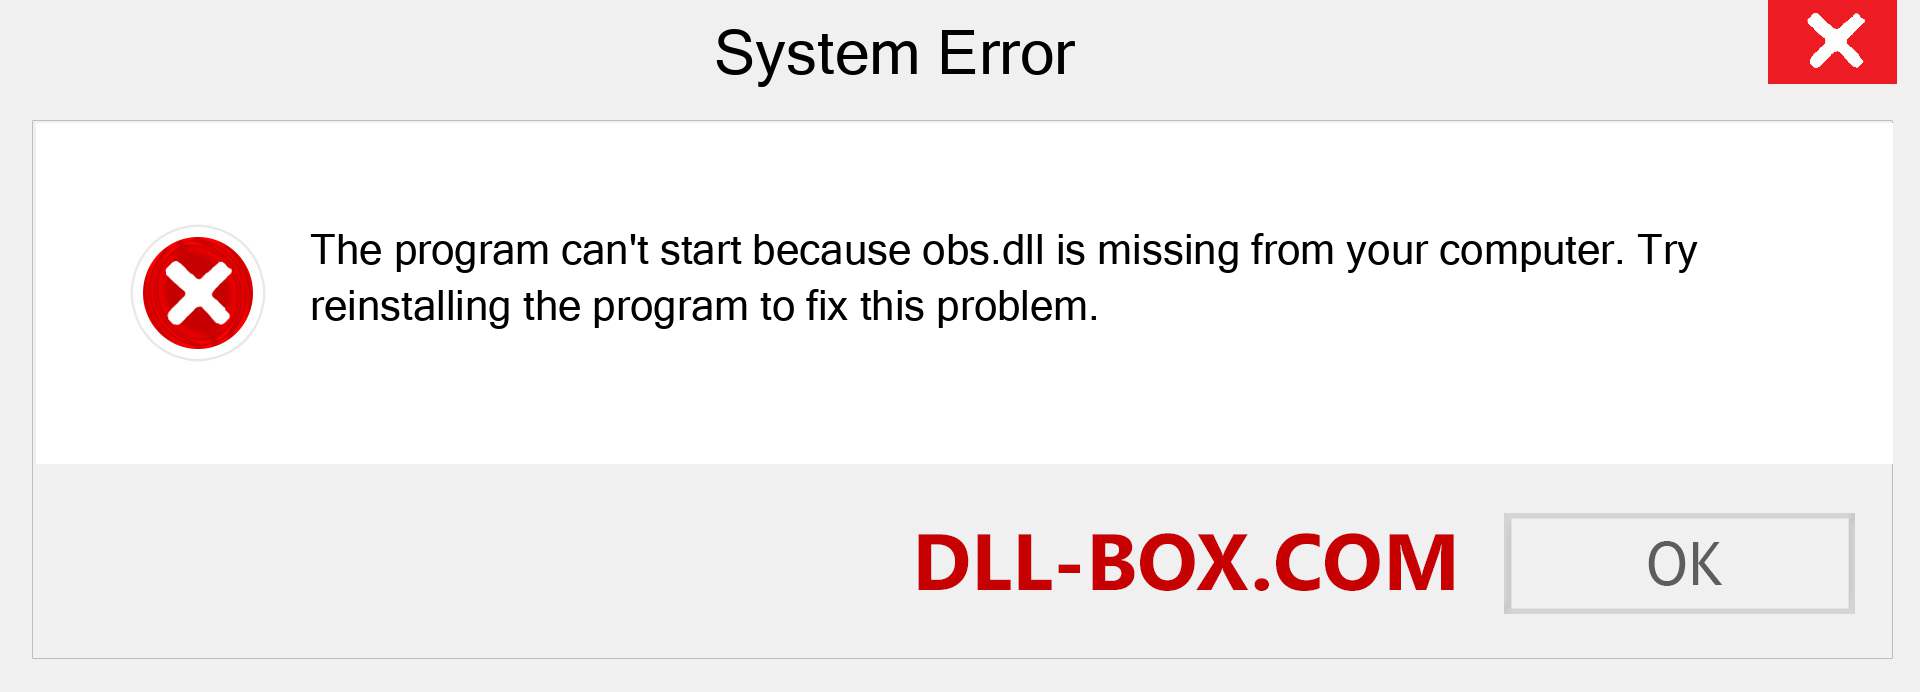  obs.dll file is missing?. Download for Windows 7, 8, 10 - Fix  obs dll Missing Error on Windows, photos, images